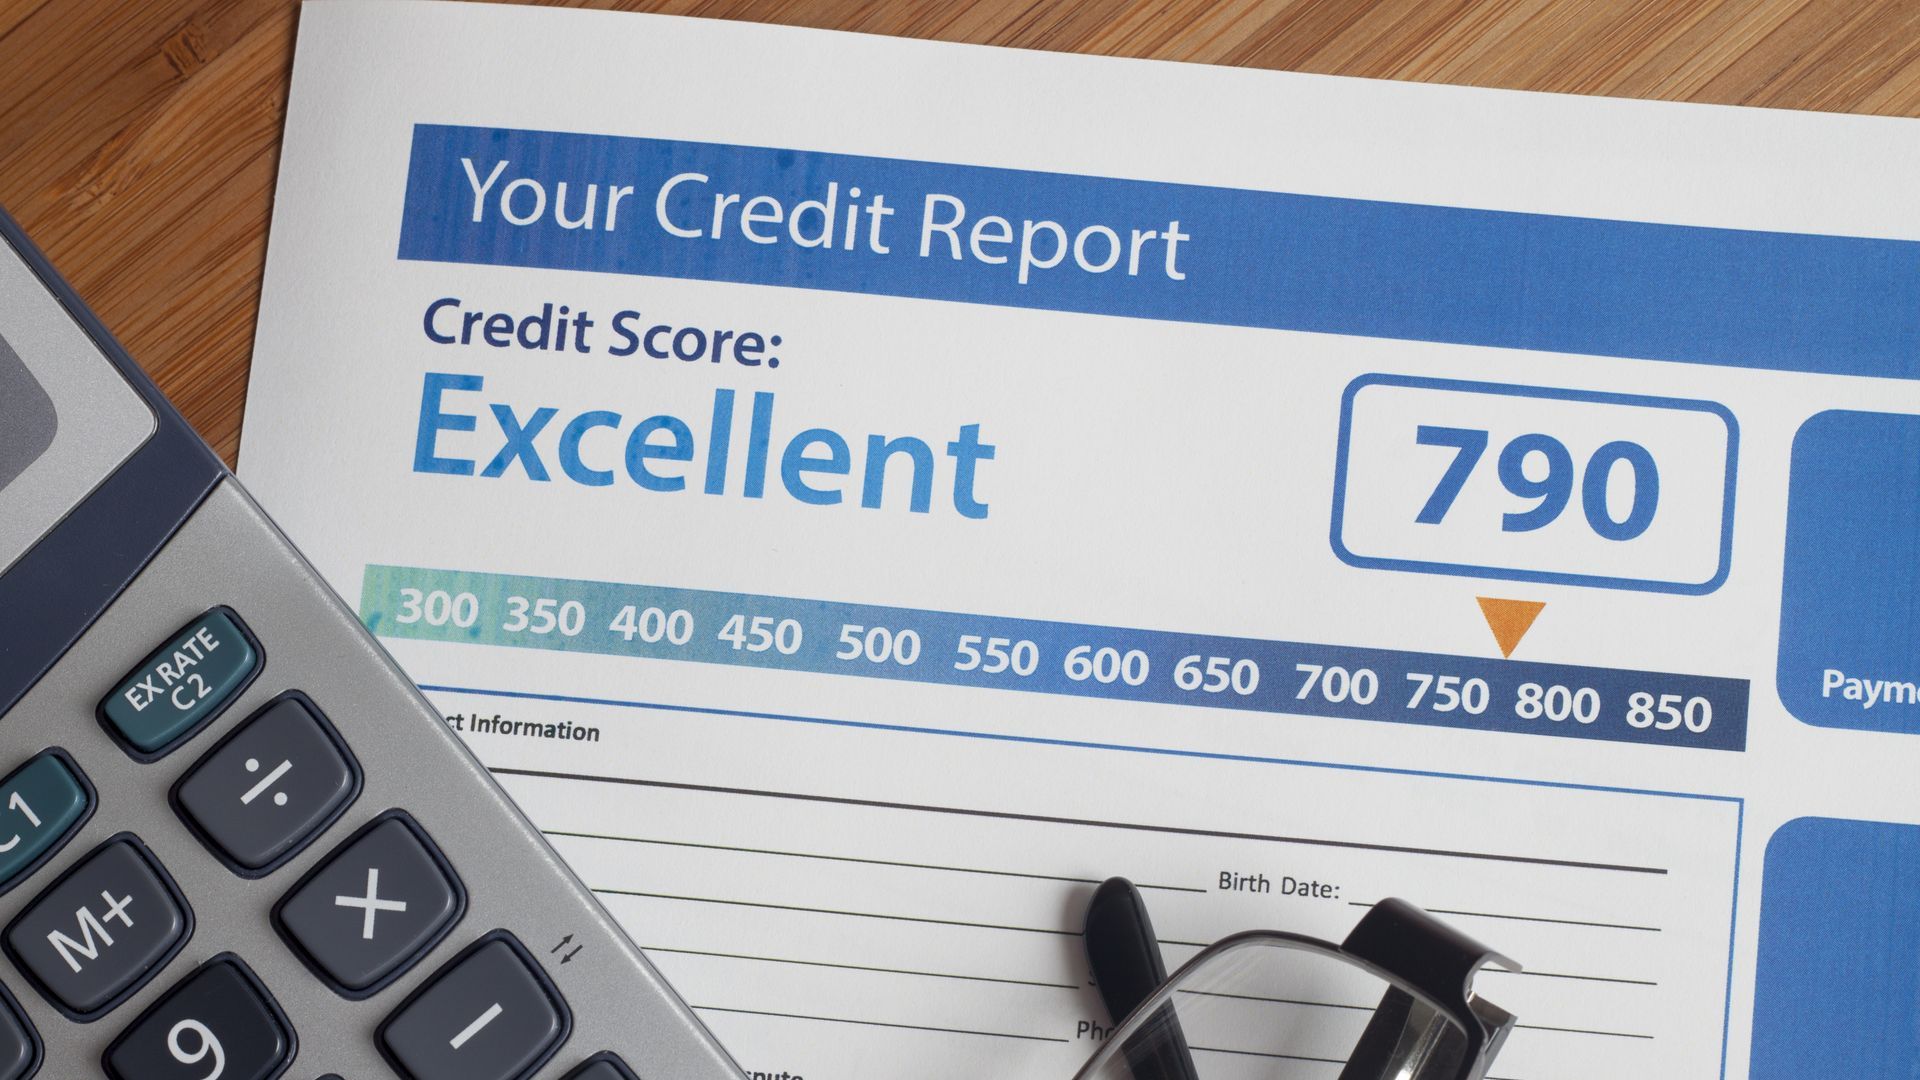 printed document of a high credit score